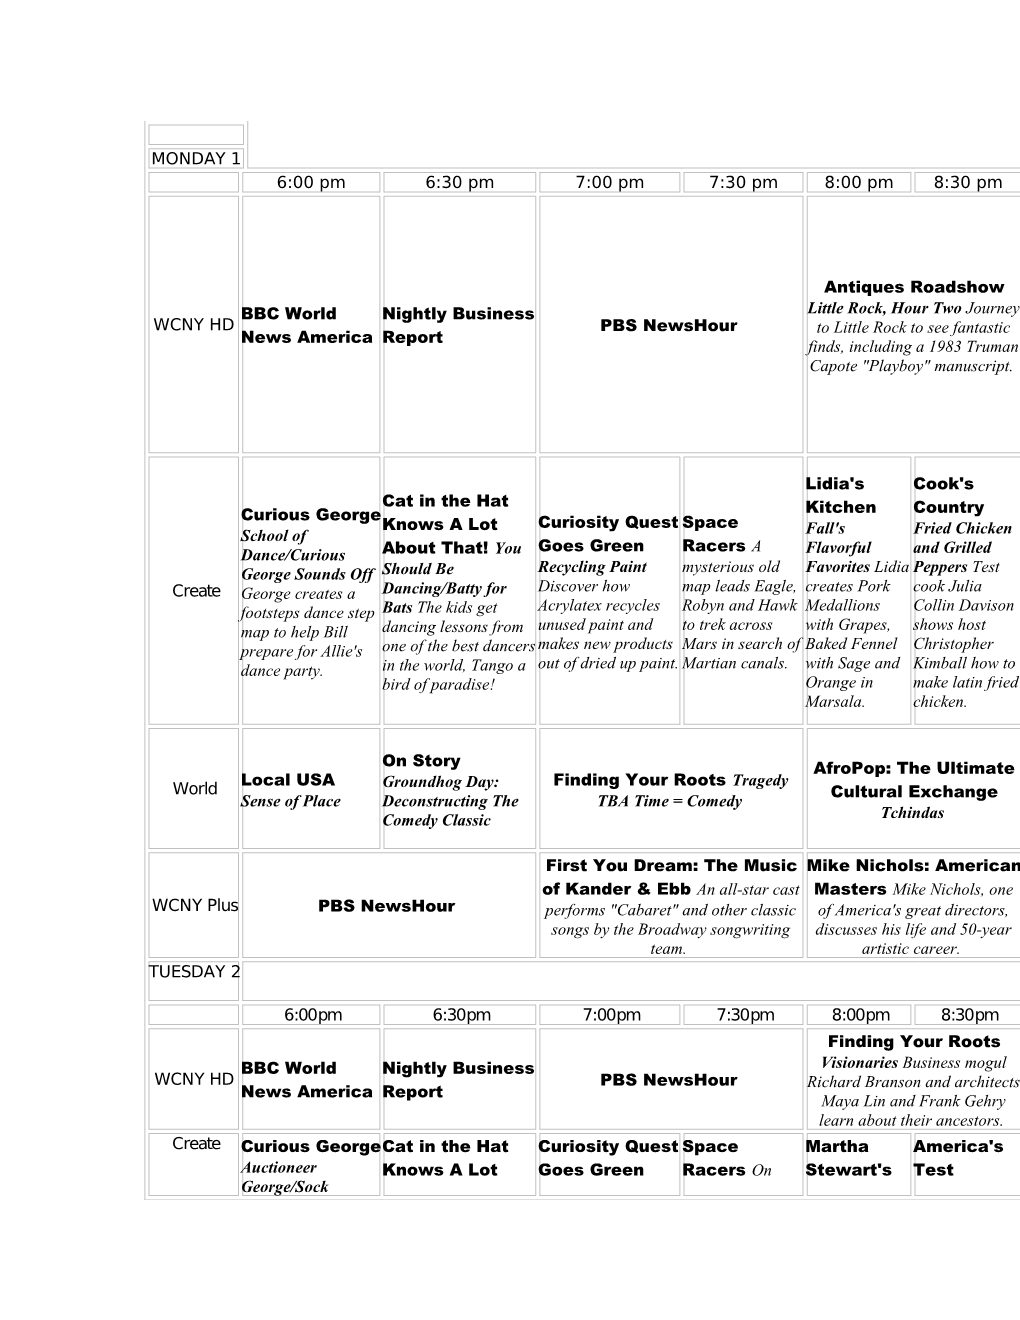 WCNY Multi Channel Grid